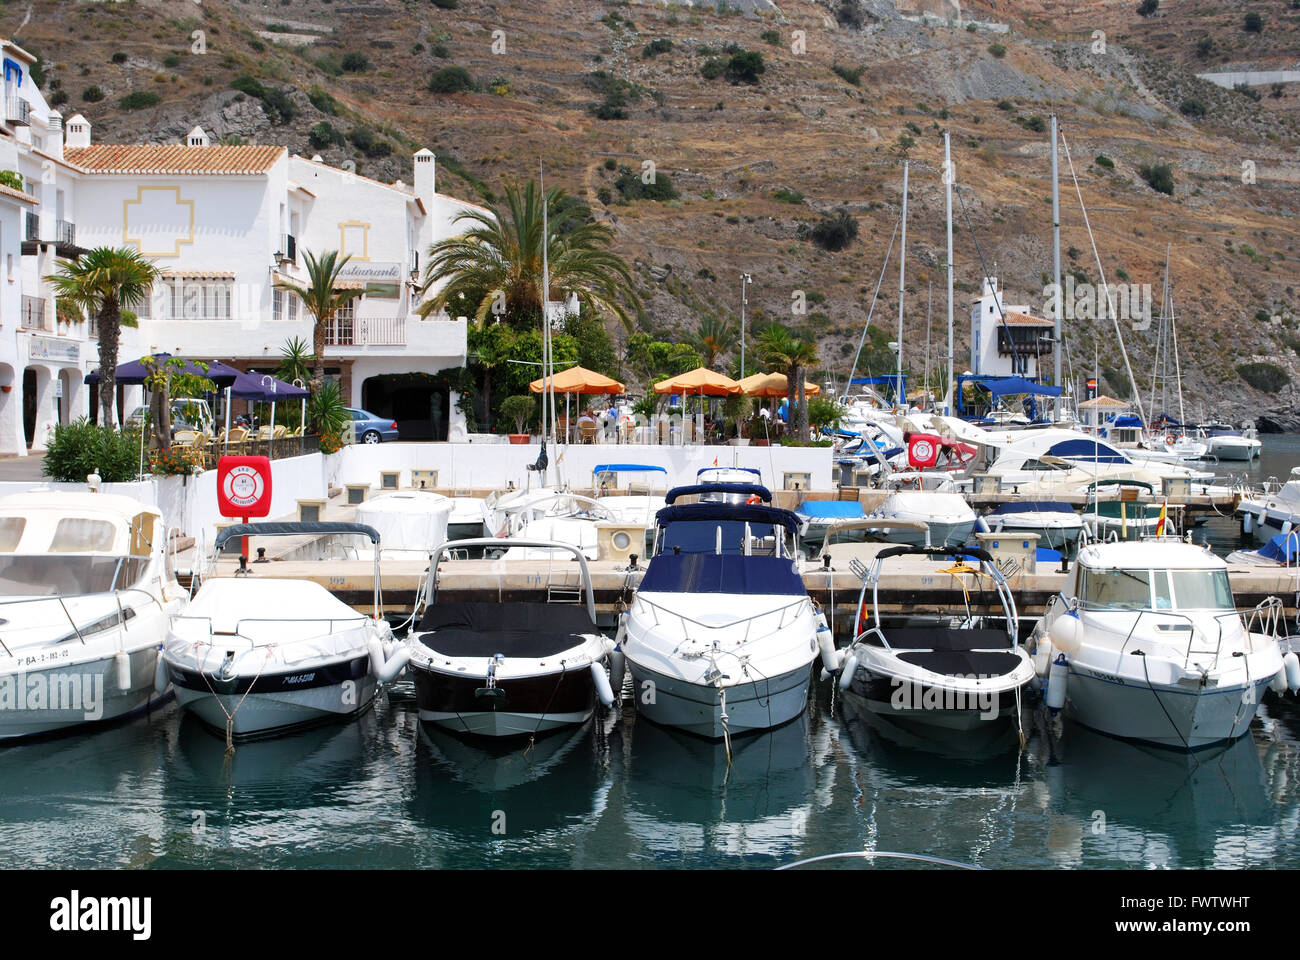 Yachts and boats moored in the marina with waterfront cafes to the rear, Marina del Este, Malaga Province, Andalusia, Spain. Stock Photo